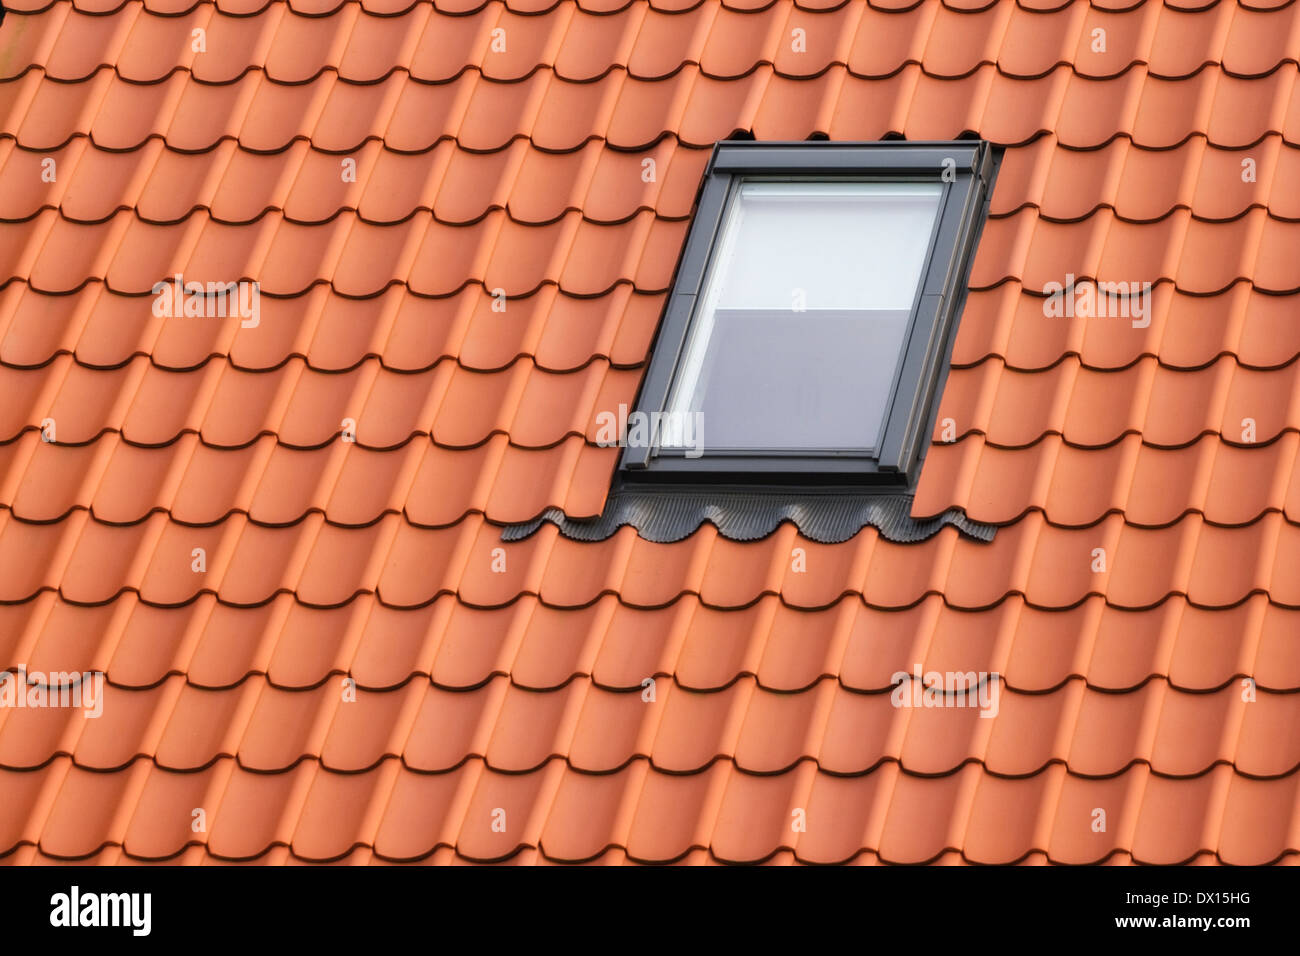 Roof with red tiling and dormer Stock Photo